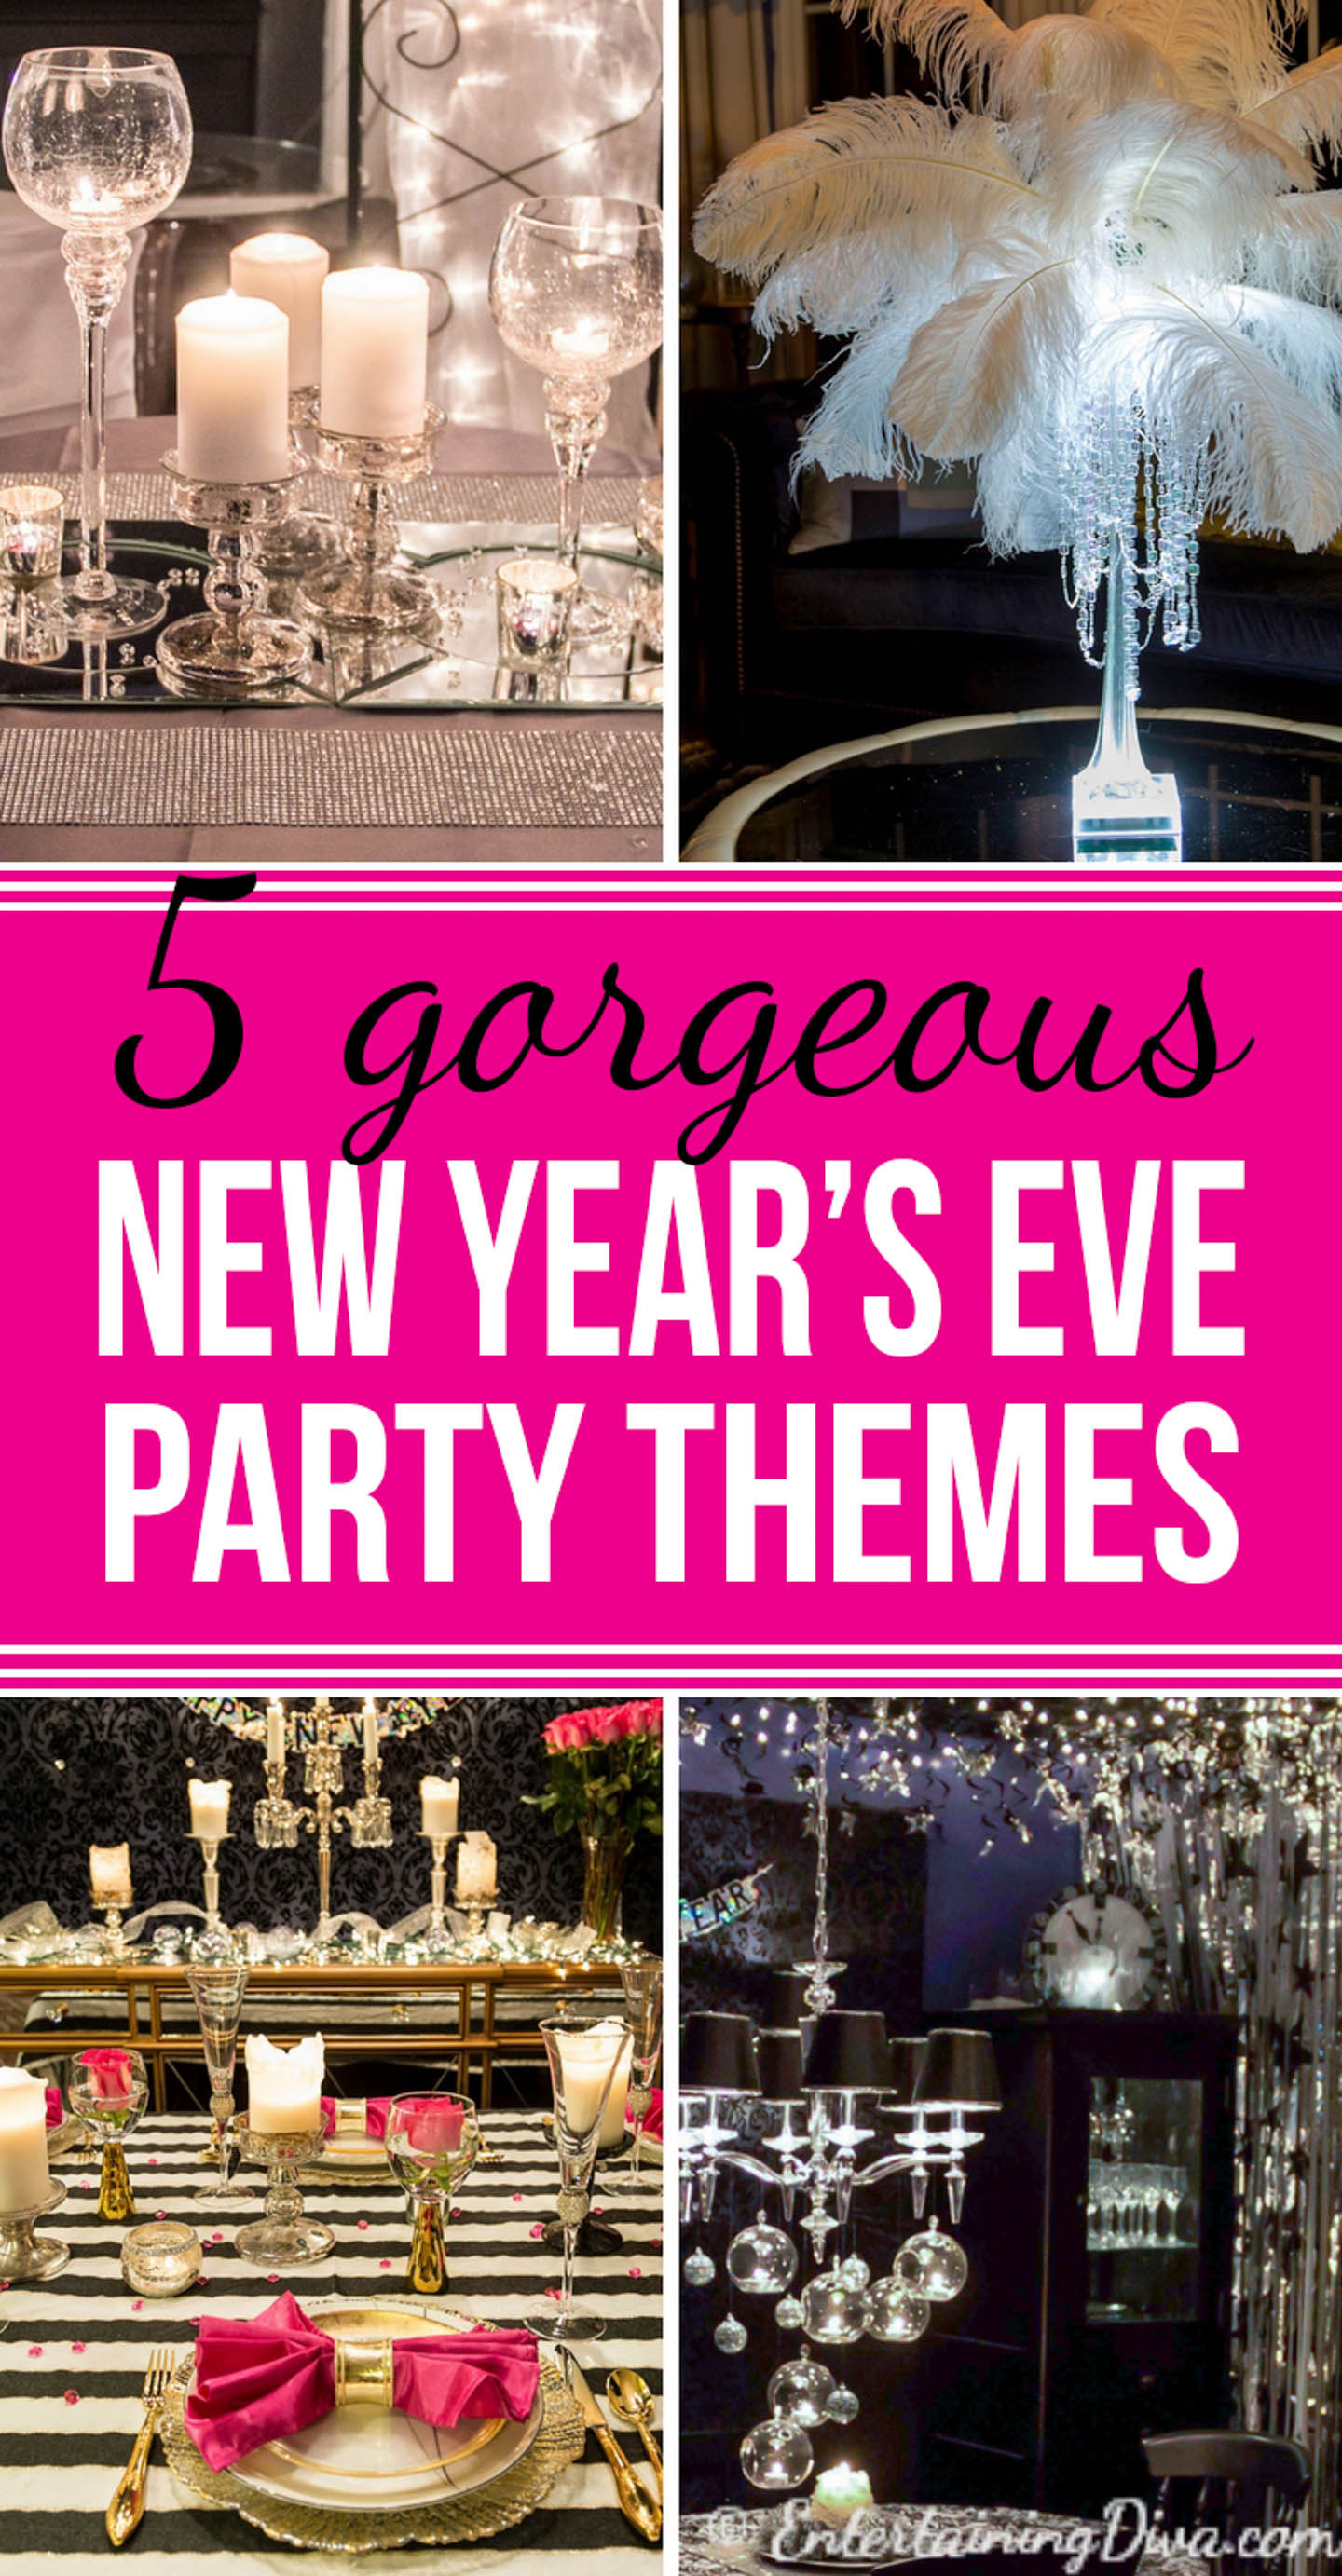 Gorgeous glam New Year's Eve party themes